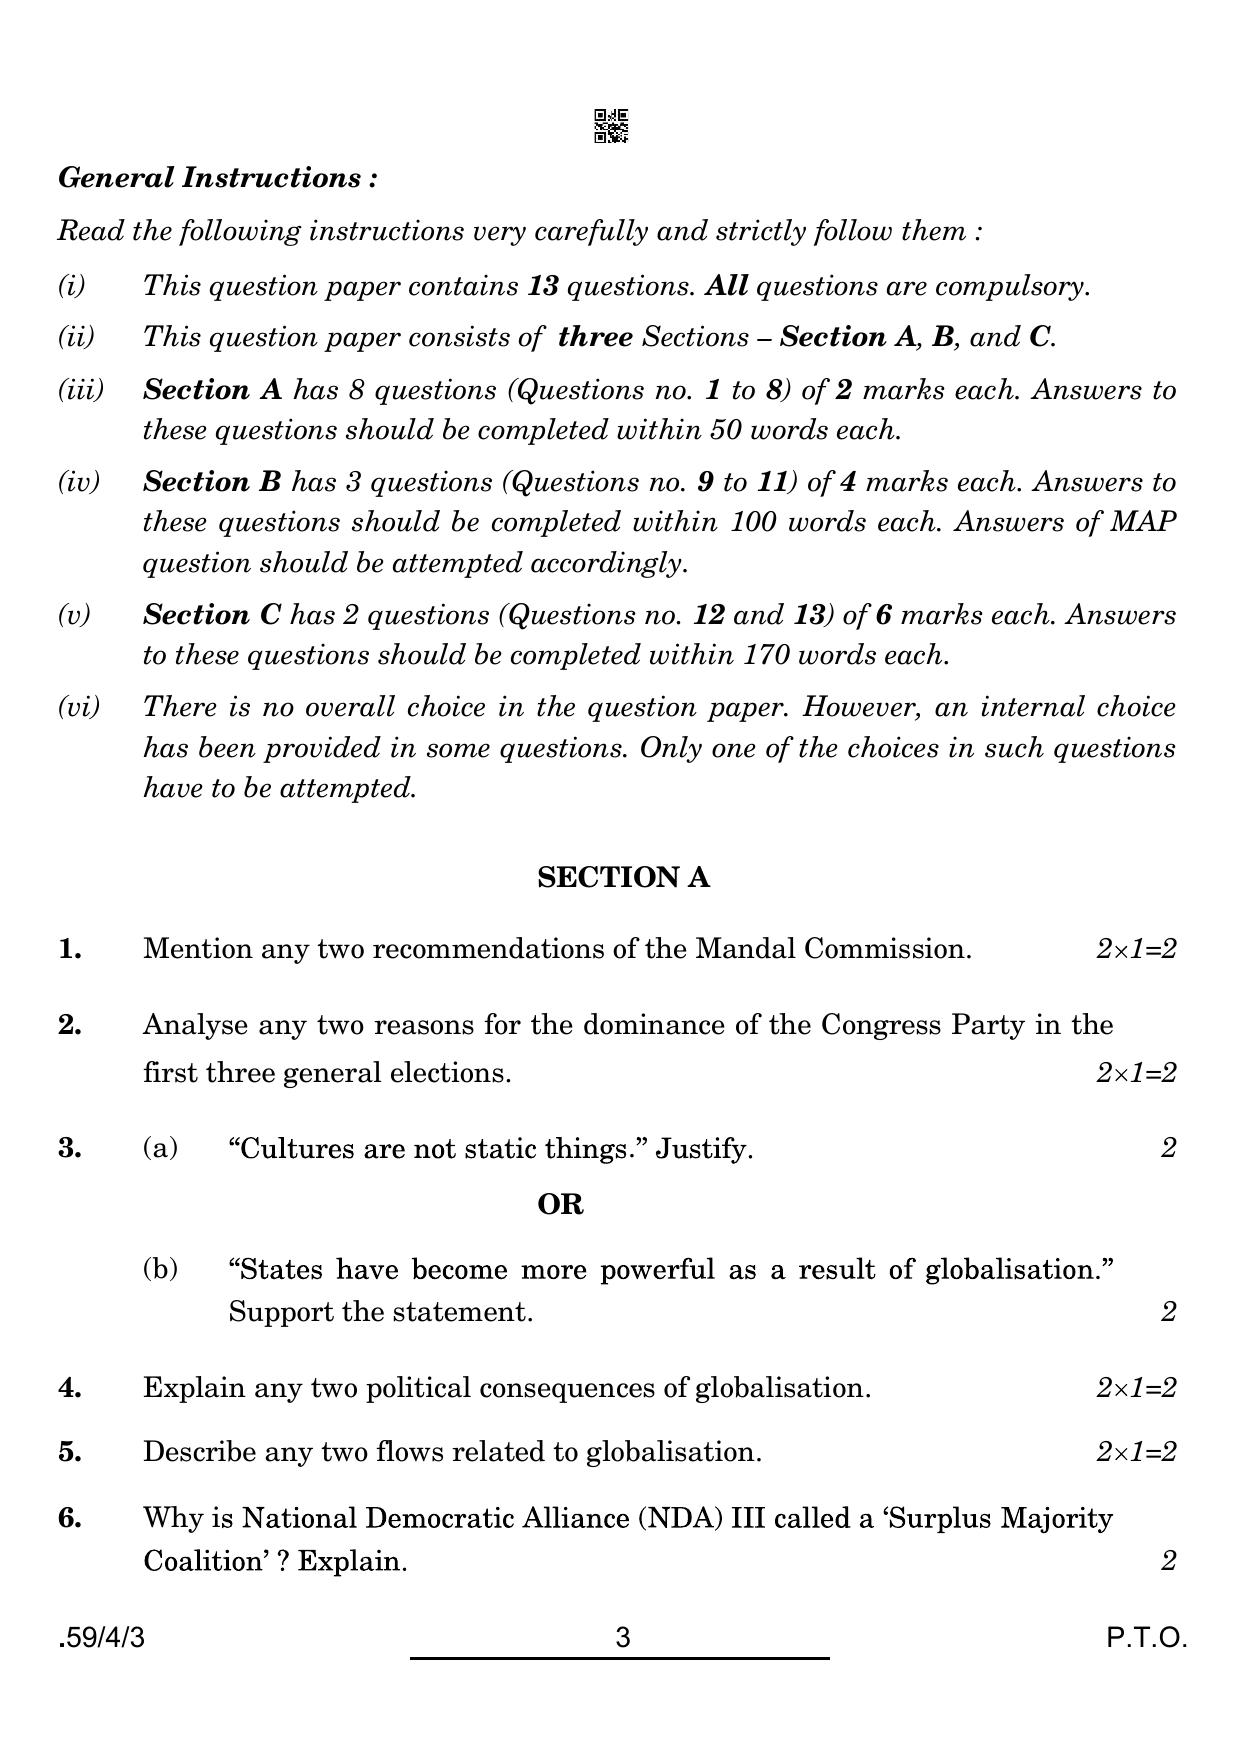 CBSE Class 12 59-4-3 Political Science 2022 Question Paper - Page 3